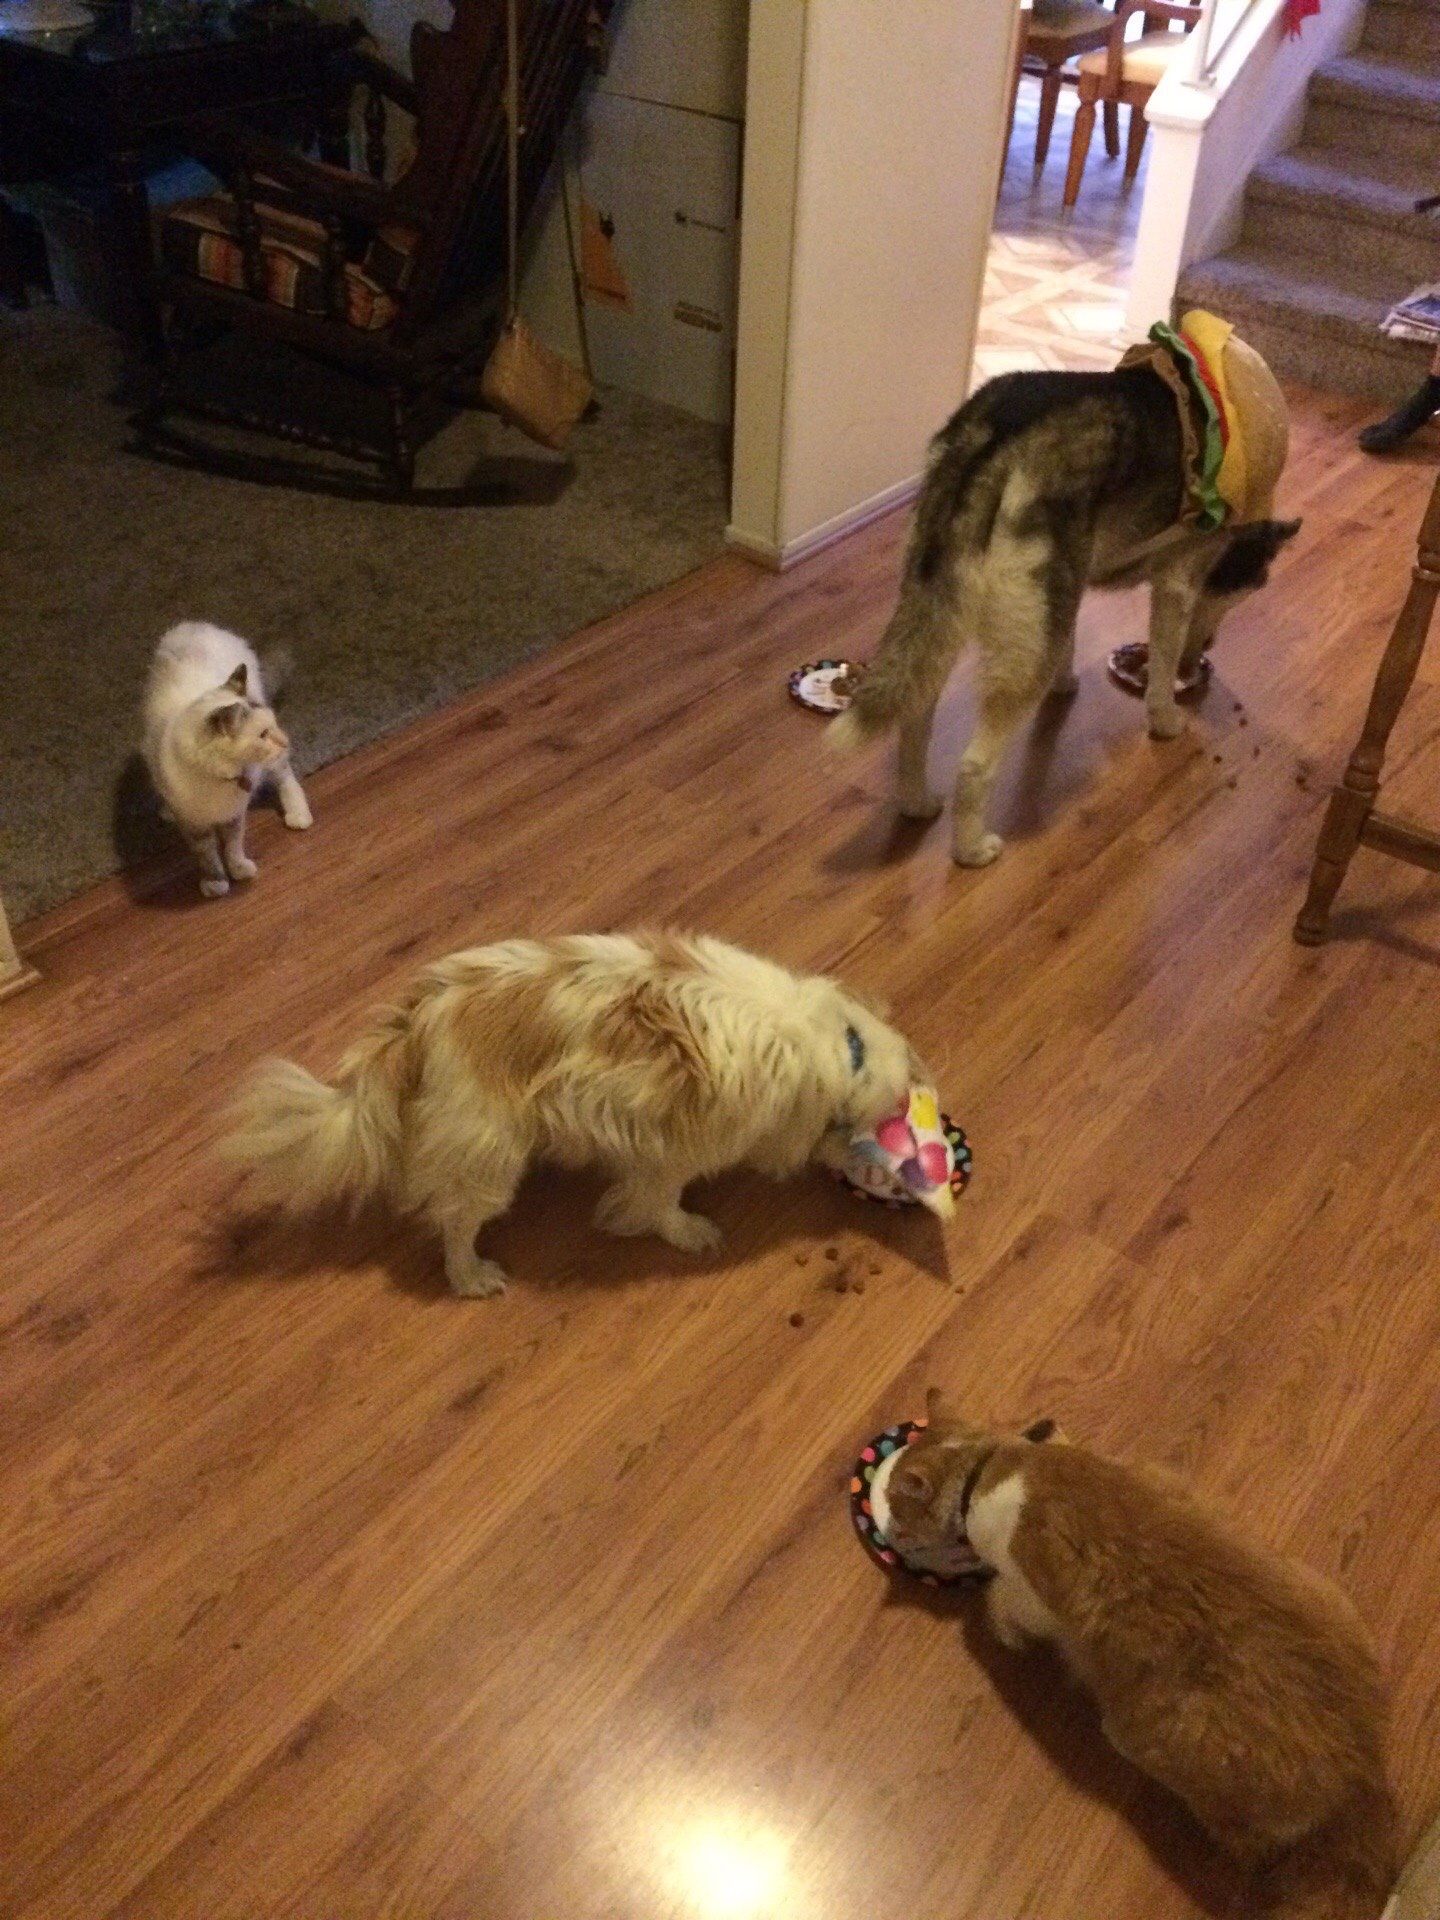 I am living abroad and asked my parents to celebrate my dog's birthday since I am away. My dad texted me this picture titled, "Birthday Party".